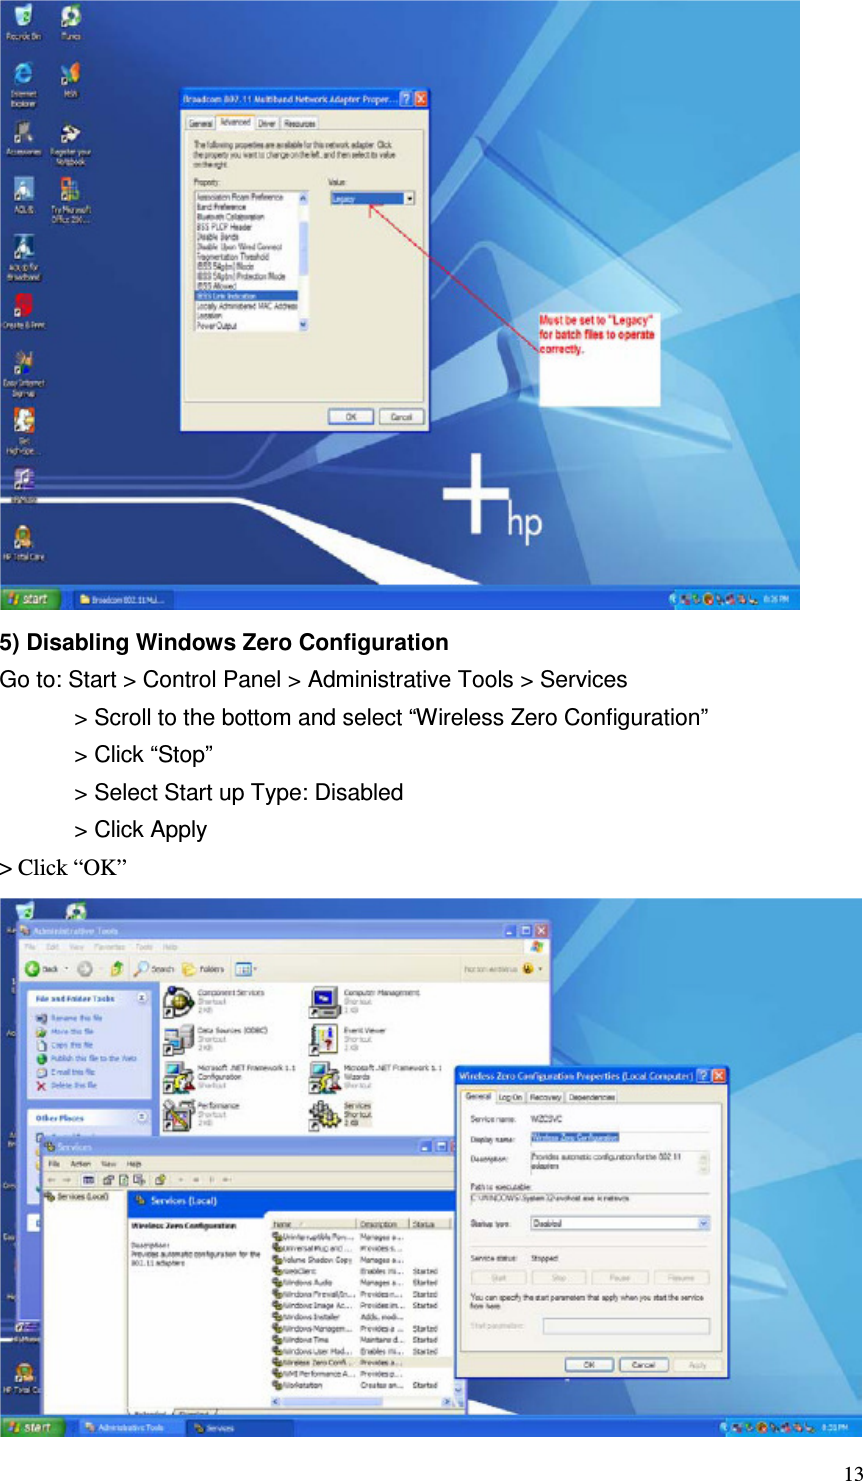   13  5) Disabling Windows Zero Configuration   Go to: Start &gt; Control Panel &gt; Administrative Tools &gt; Services   &gt; Scroll to the bottom and select “Wireless Zero Configuration”   &gt; Click “Stop”   &gt; Select Start up Type: Disabled   &gt; Click Apply   &gt; Click “OK”  